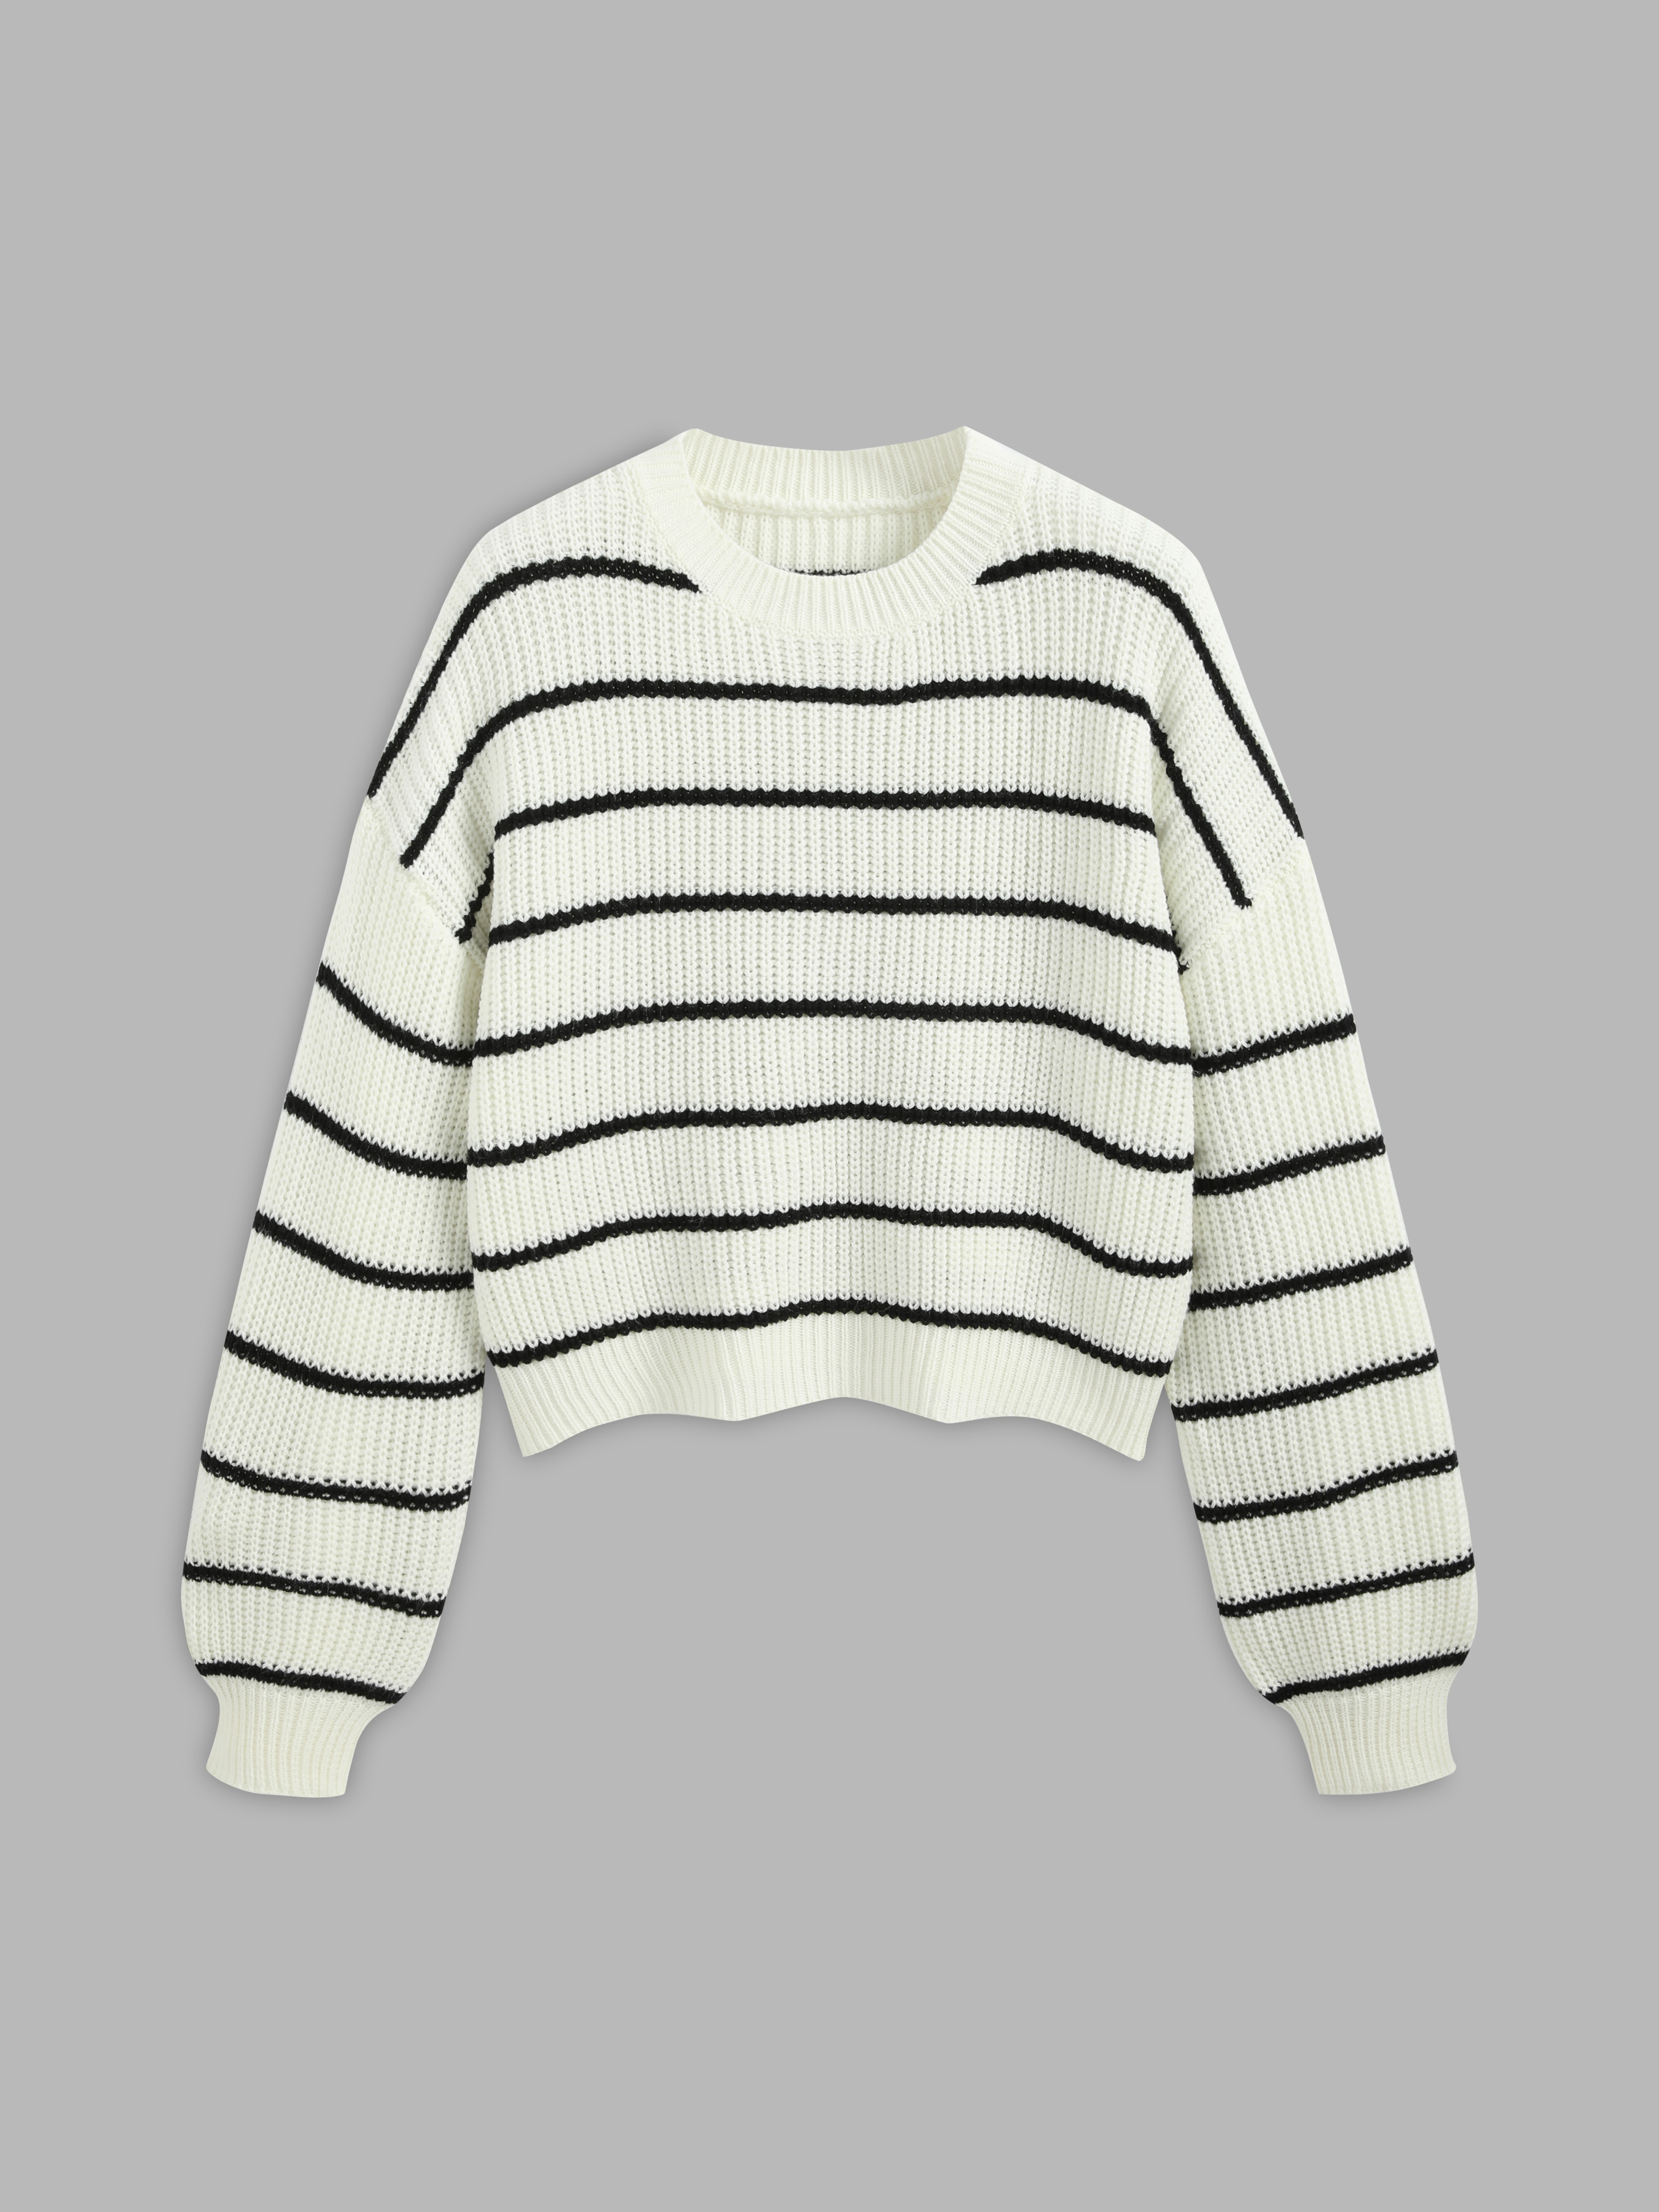 Knitted Long Sleeve Tops - Cider